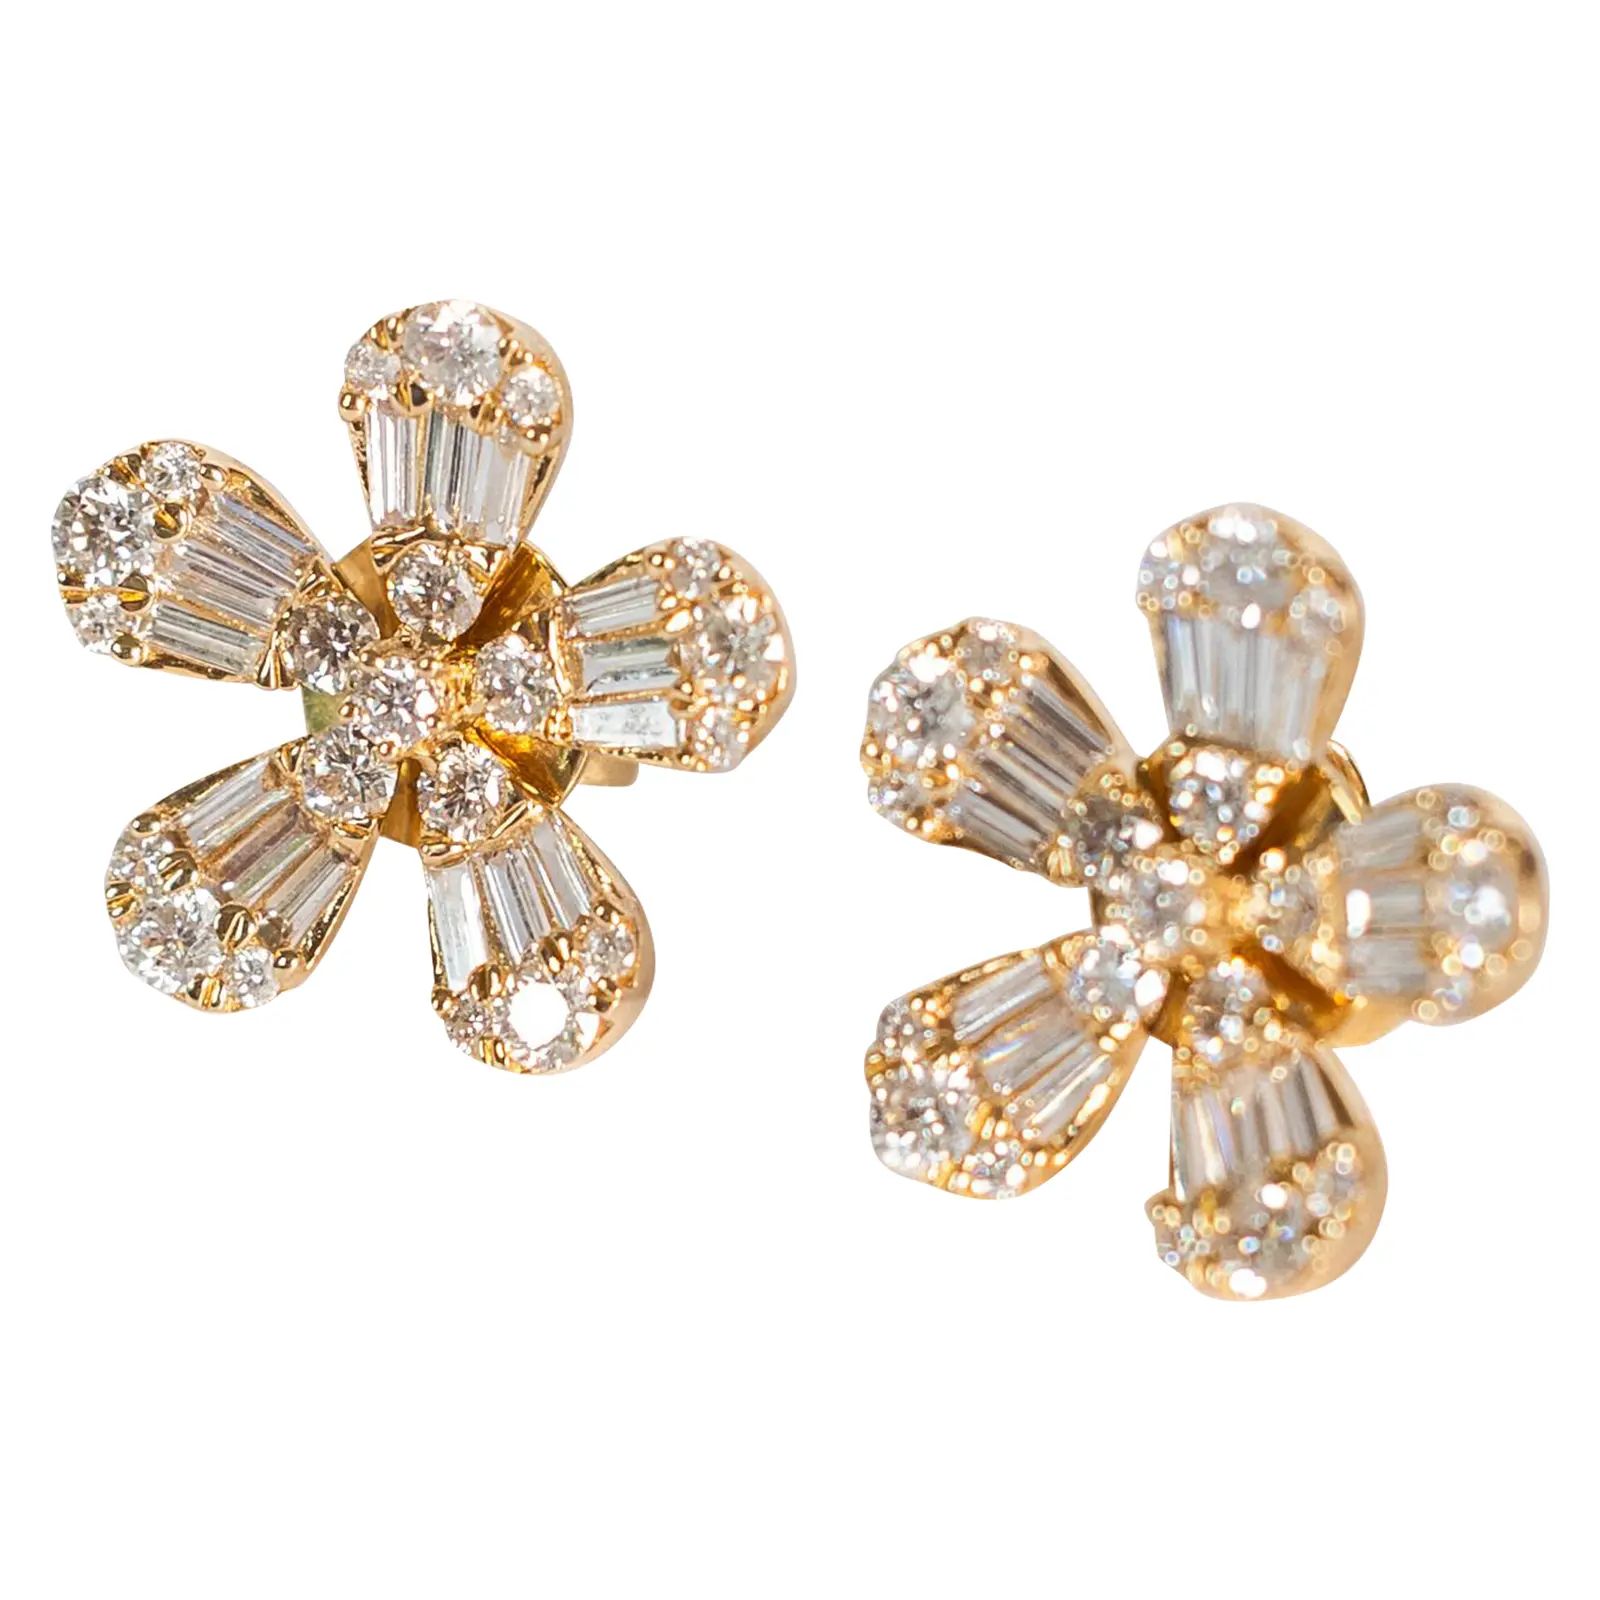 Rocks With Soul Yellow Gold Large Flower Baguette Studs - 2 Pieces | Chairish